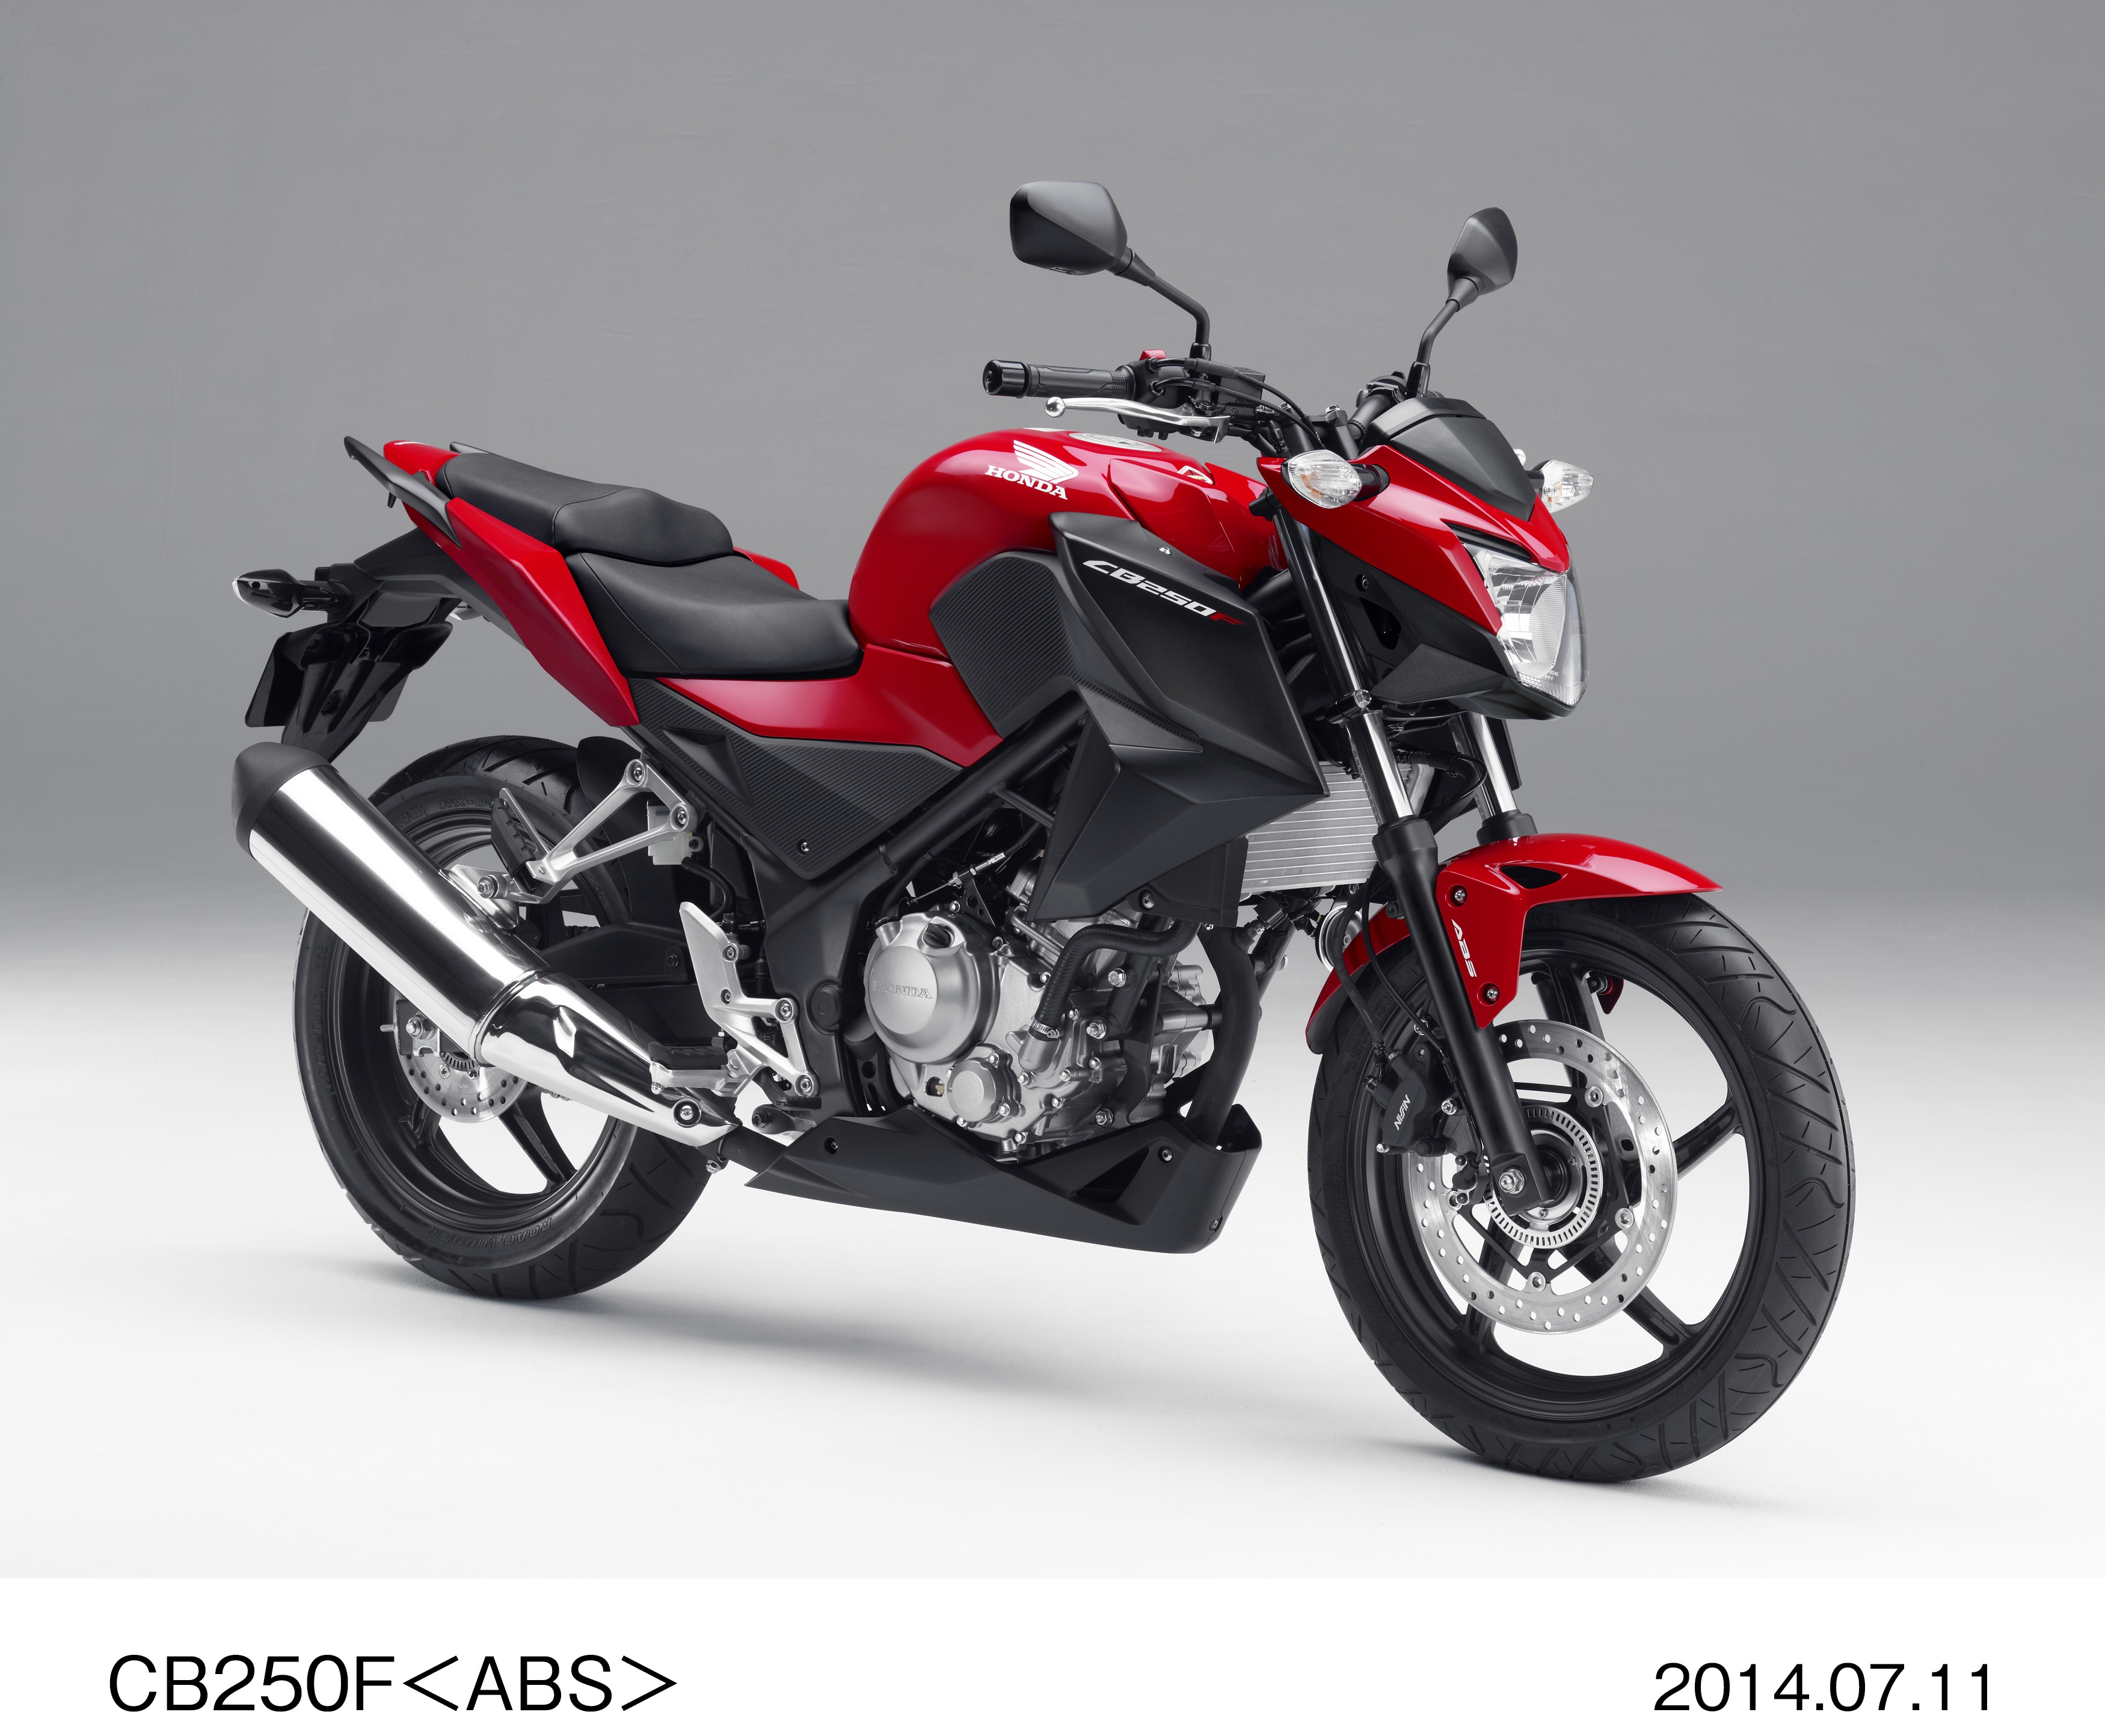 Honda CB300F: more pictures and details